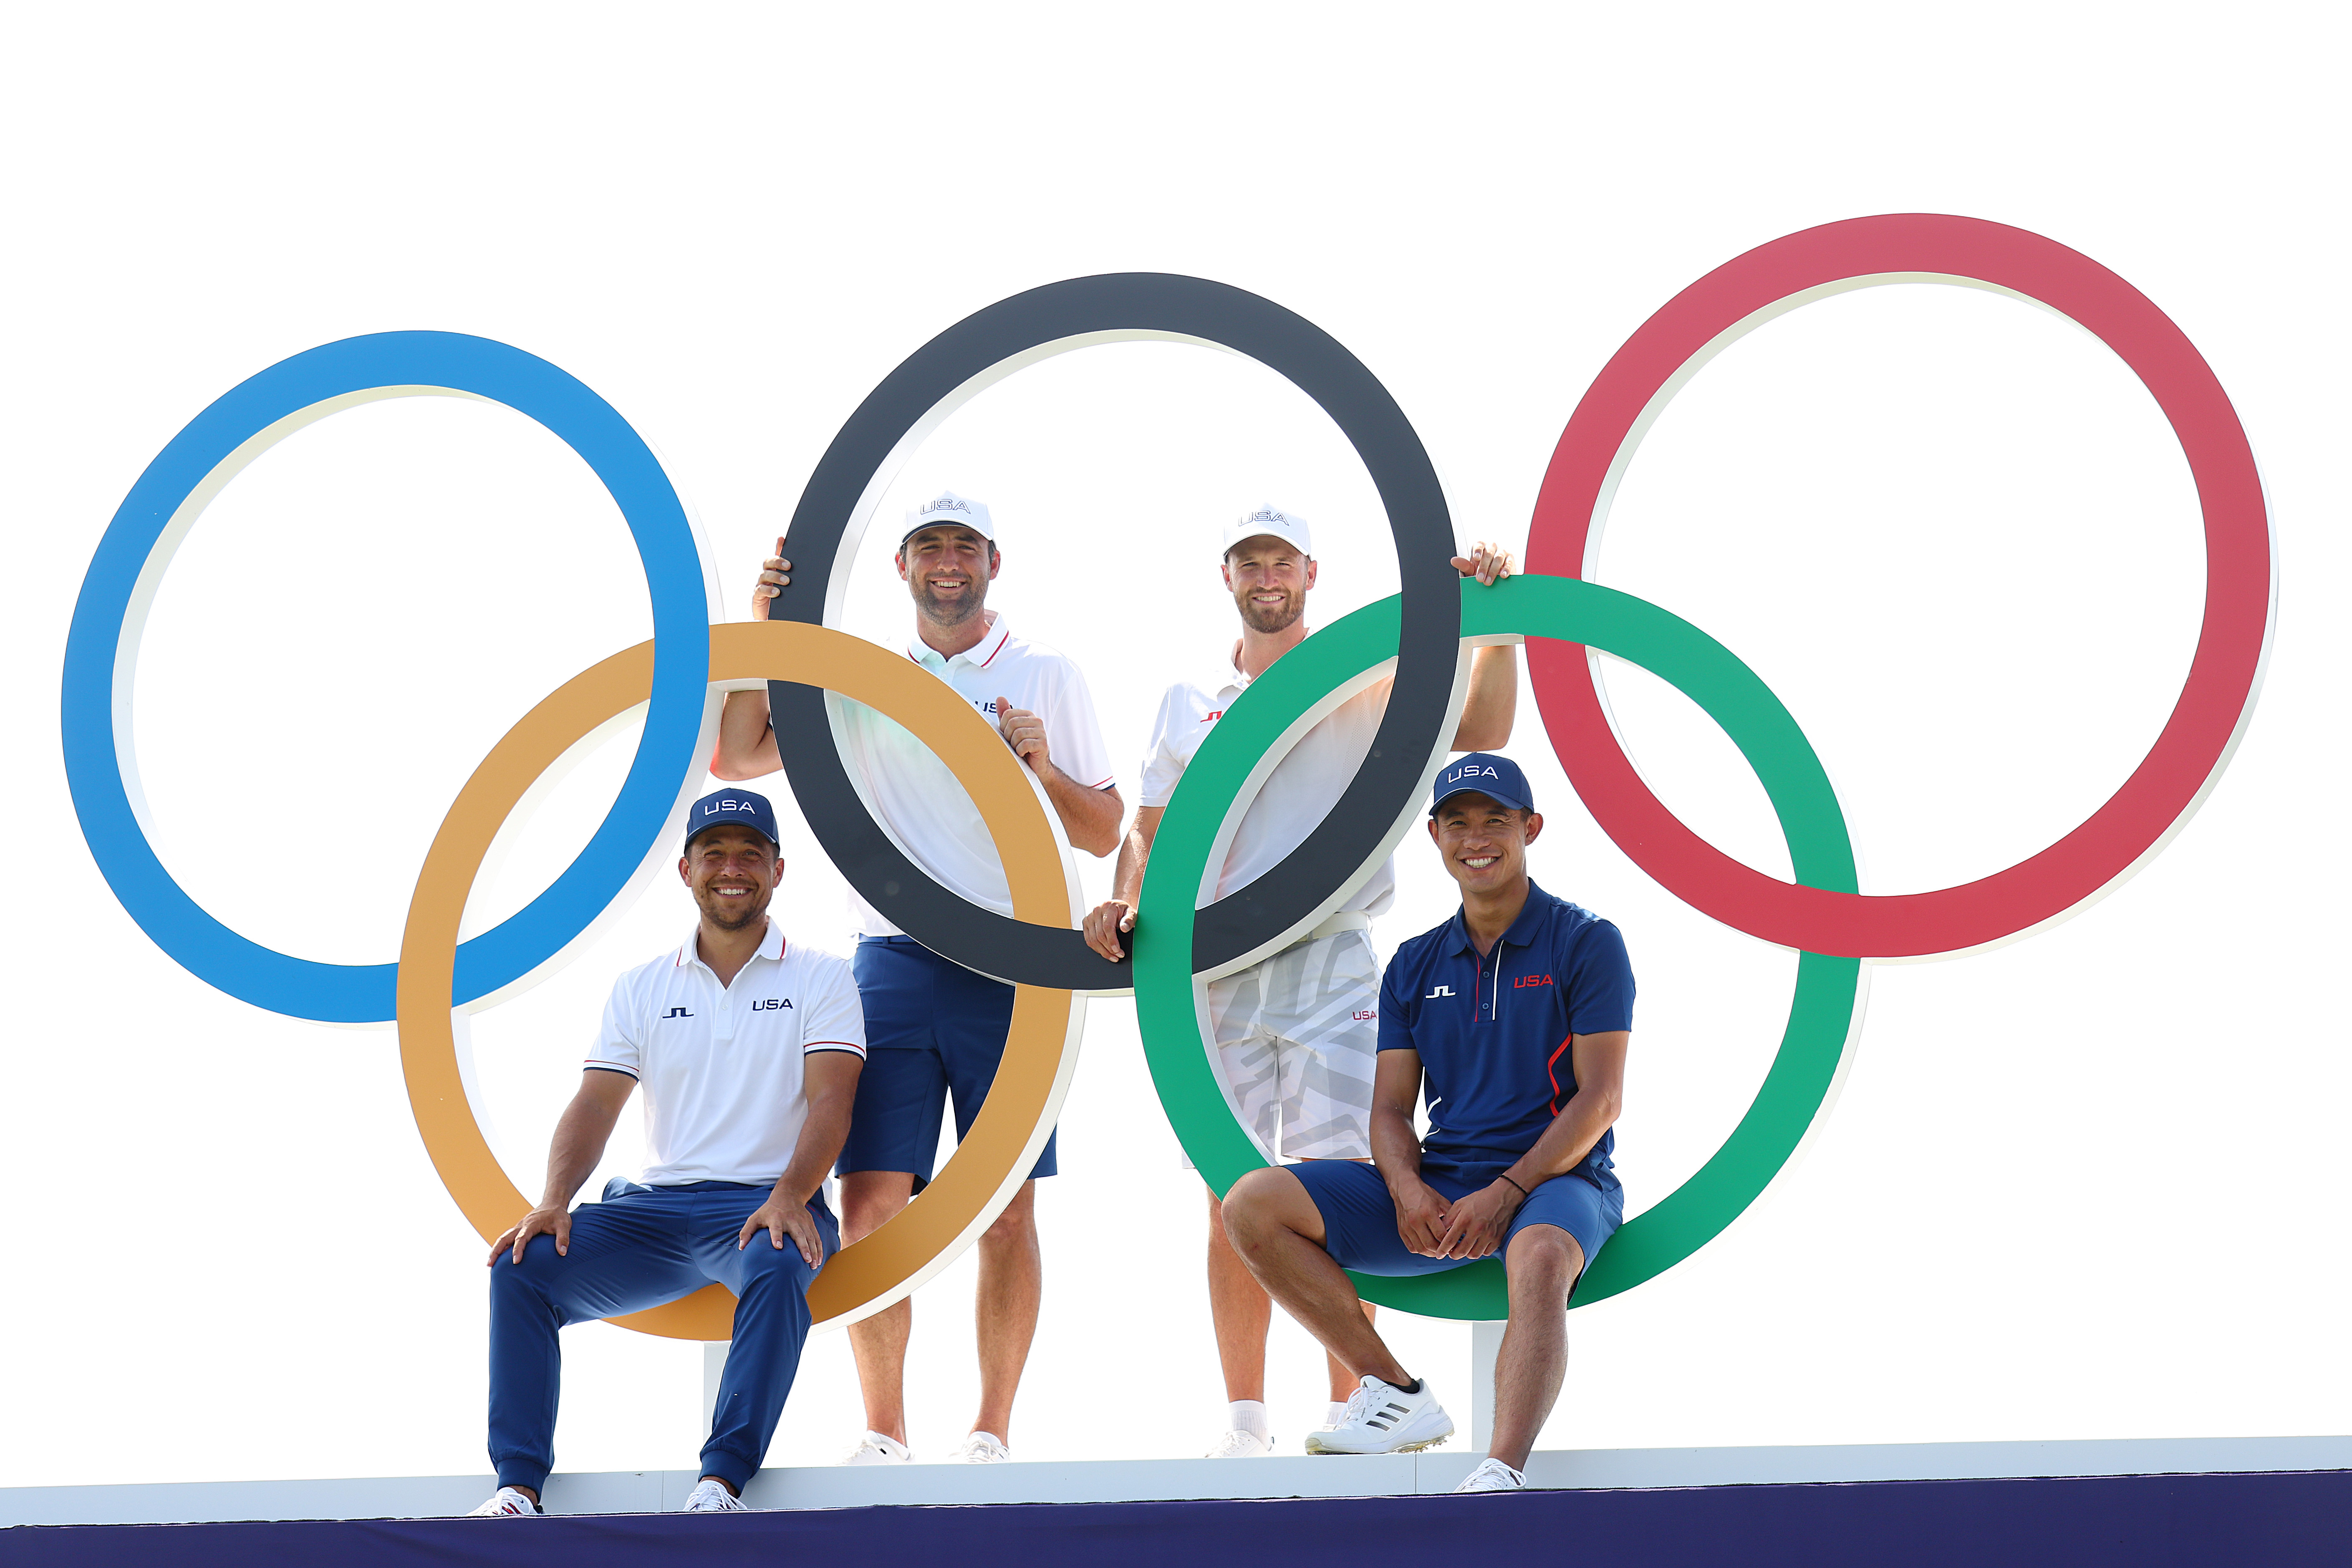 Can Golf Grow From the Olympics?